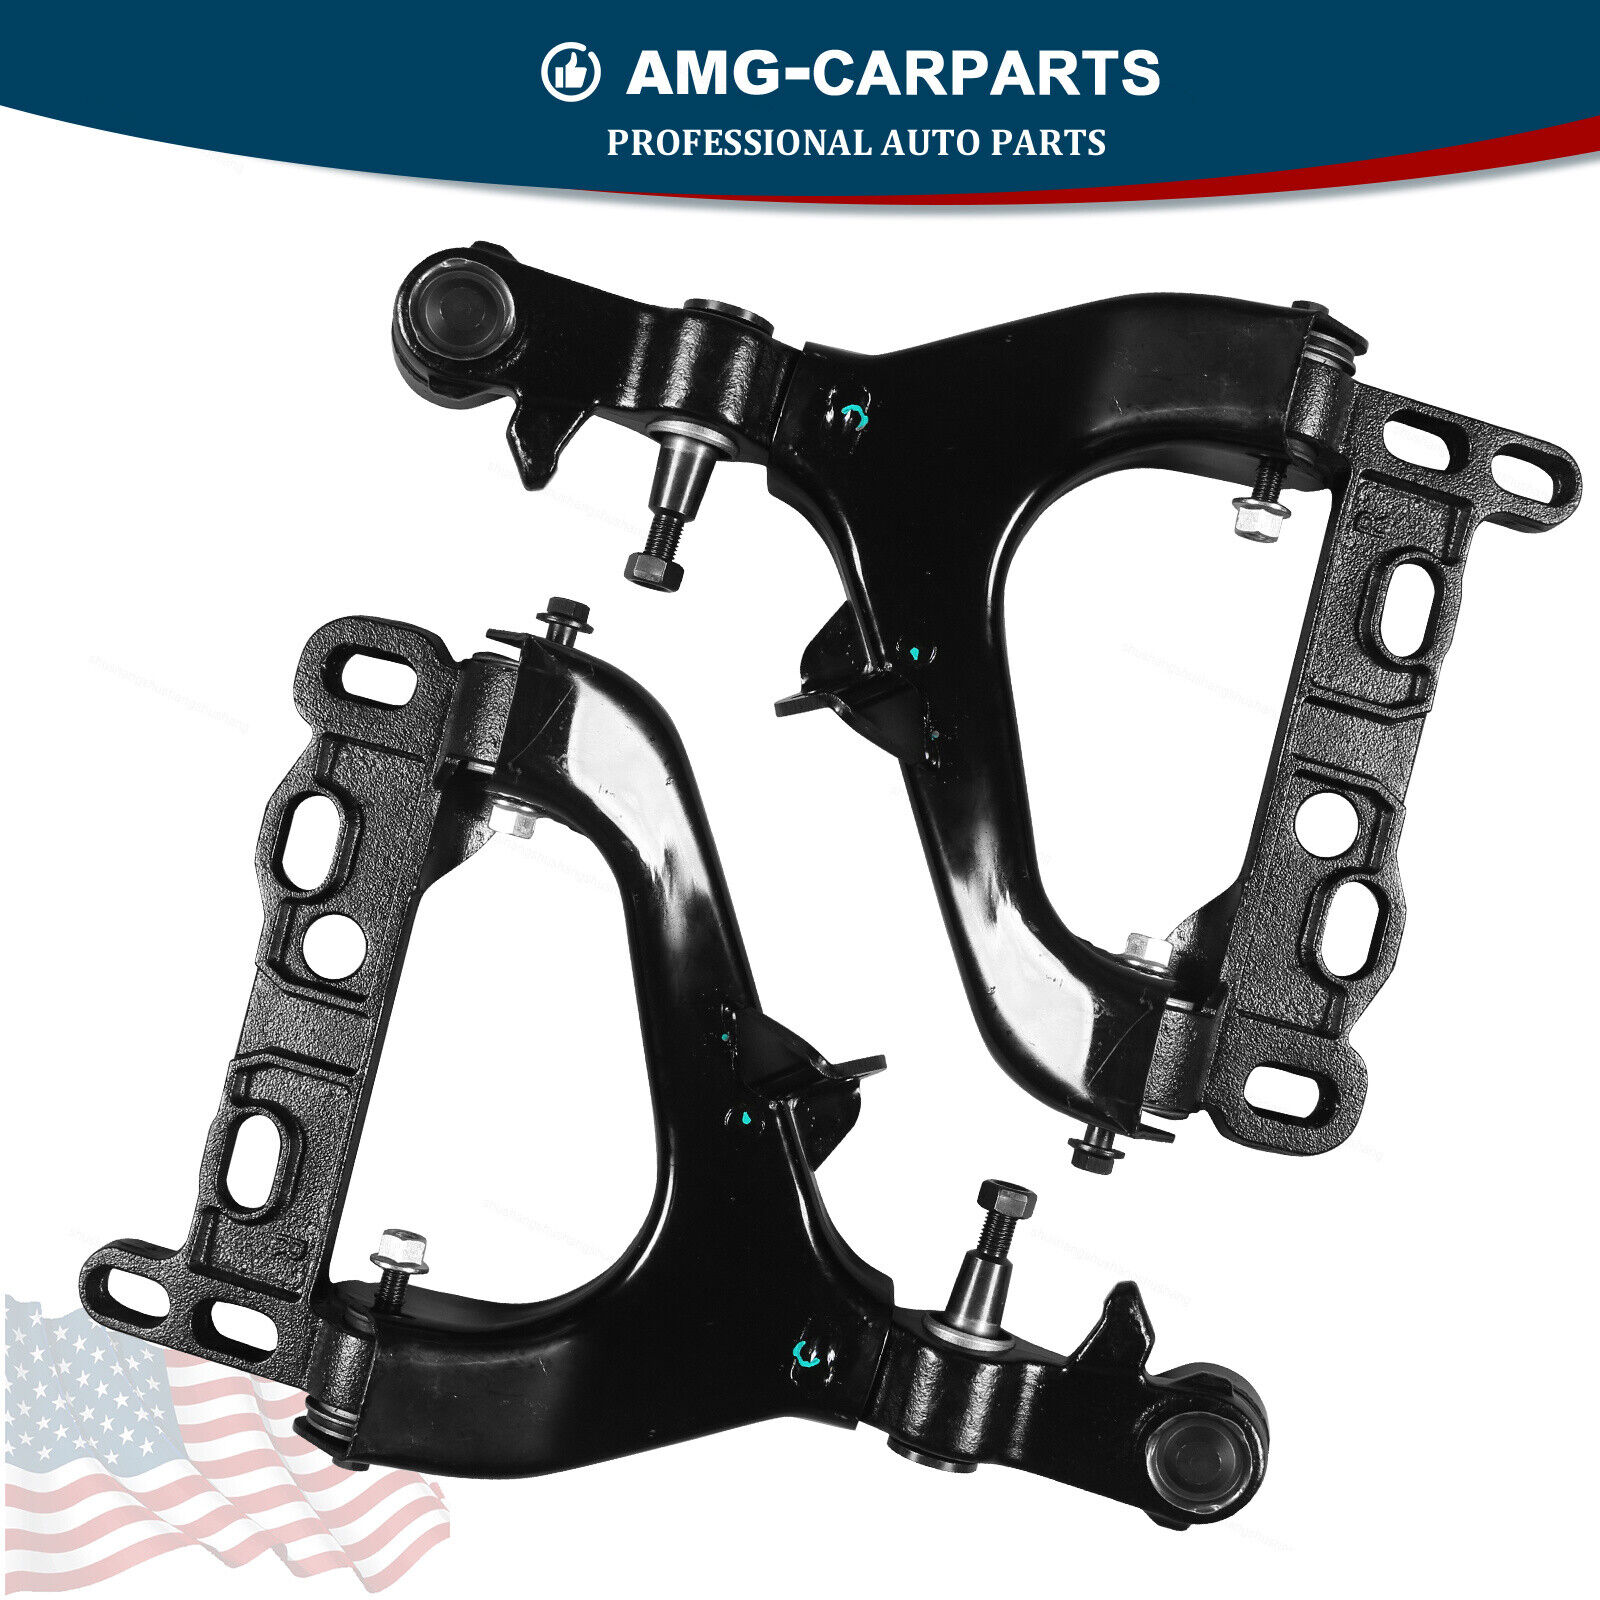 Pair Front Lower Control Arms Fit for 2004-2007 GMC Envoy Chevy Trailblazer